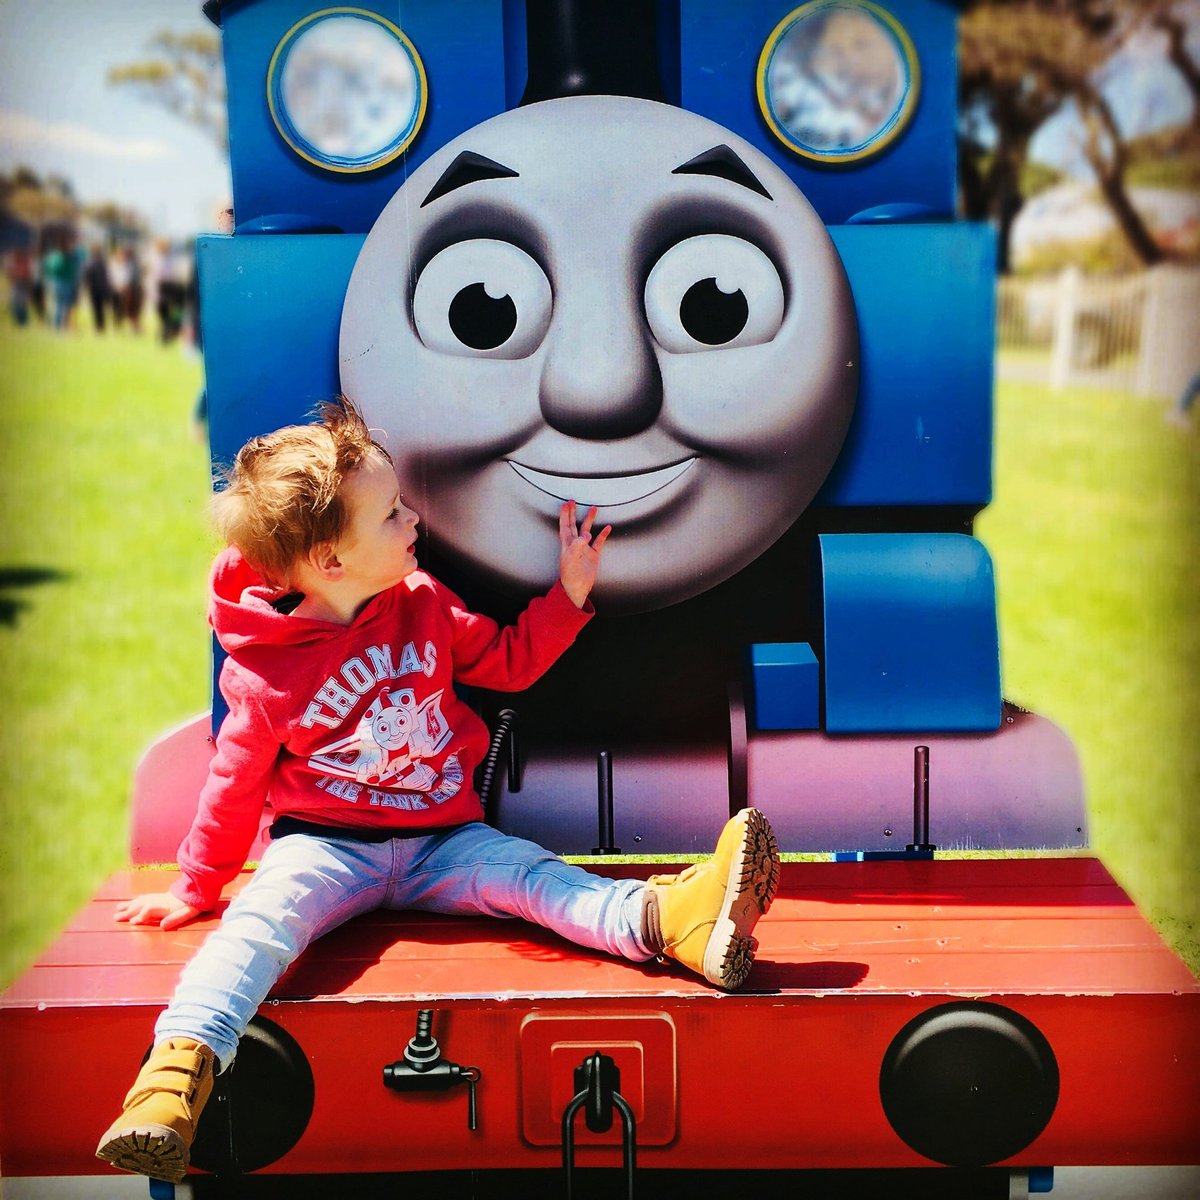 @VDiscovers was invited by @BRailway to attend their 'Day Out With Thomas'.
victoriadiscovers.com/2019/10/06/a-d…
 #Bellarine #bellarinerailway #adayoutwiththomas  #thomasthetankengine #visitbellarinepeninsula #visitqueenscliff #bellarinepeninsula #victoriadiscovers #visitmelbourne #visitmelb